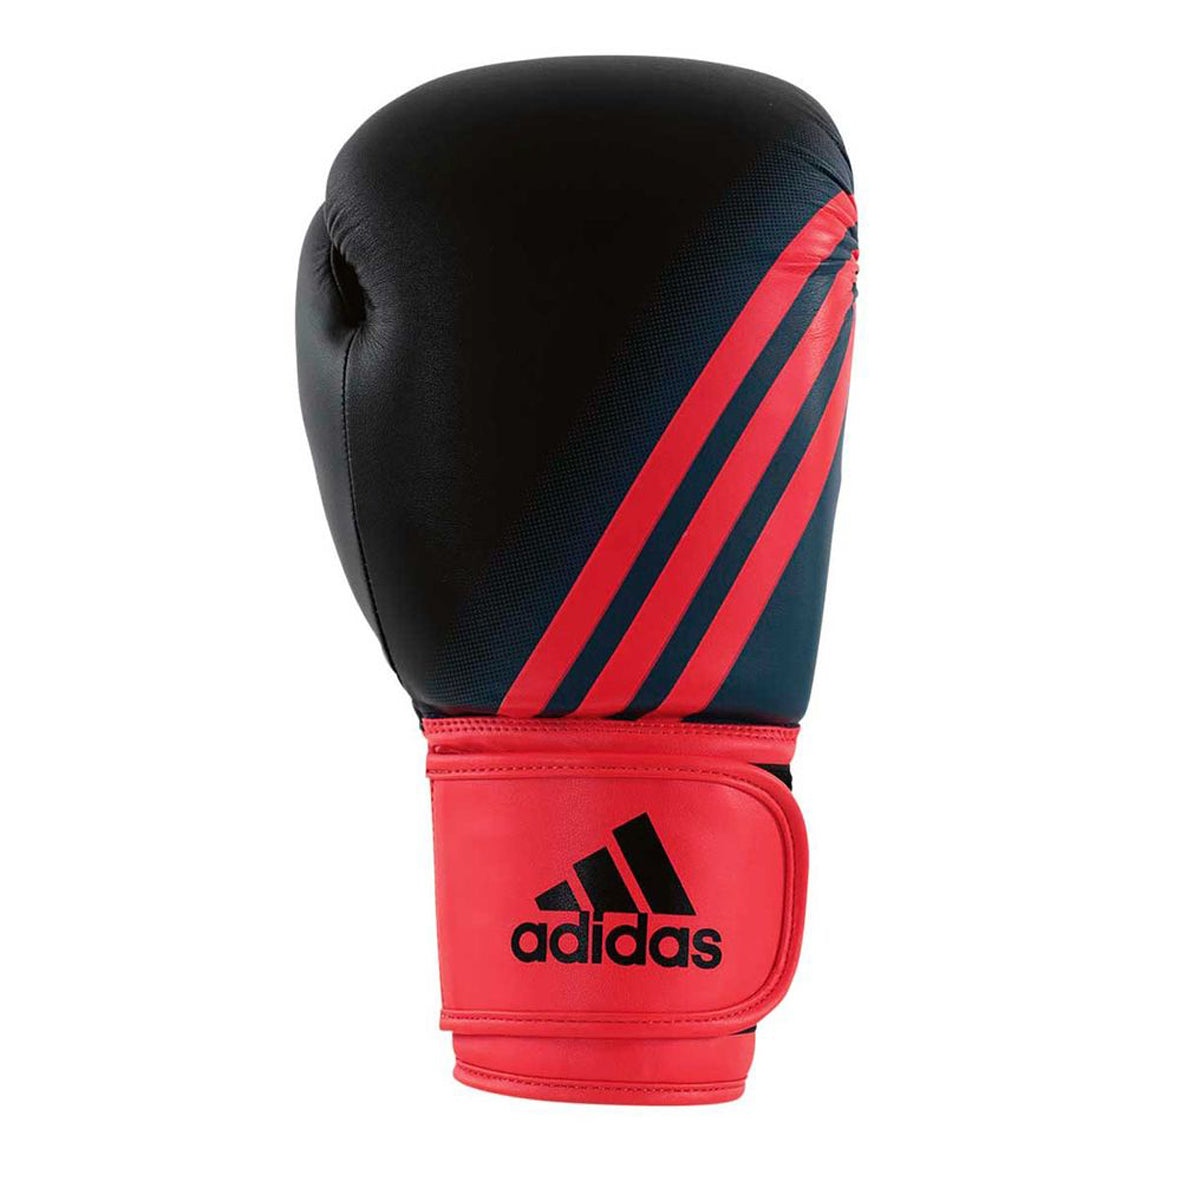 SPEED 100 GLOVE - ADIDAS BLK/RED-10OZ (Available)